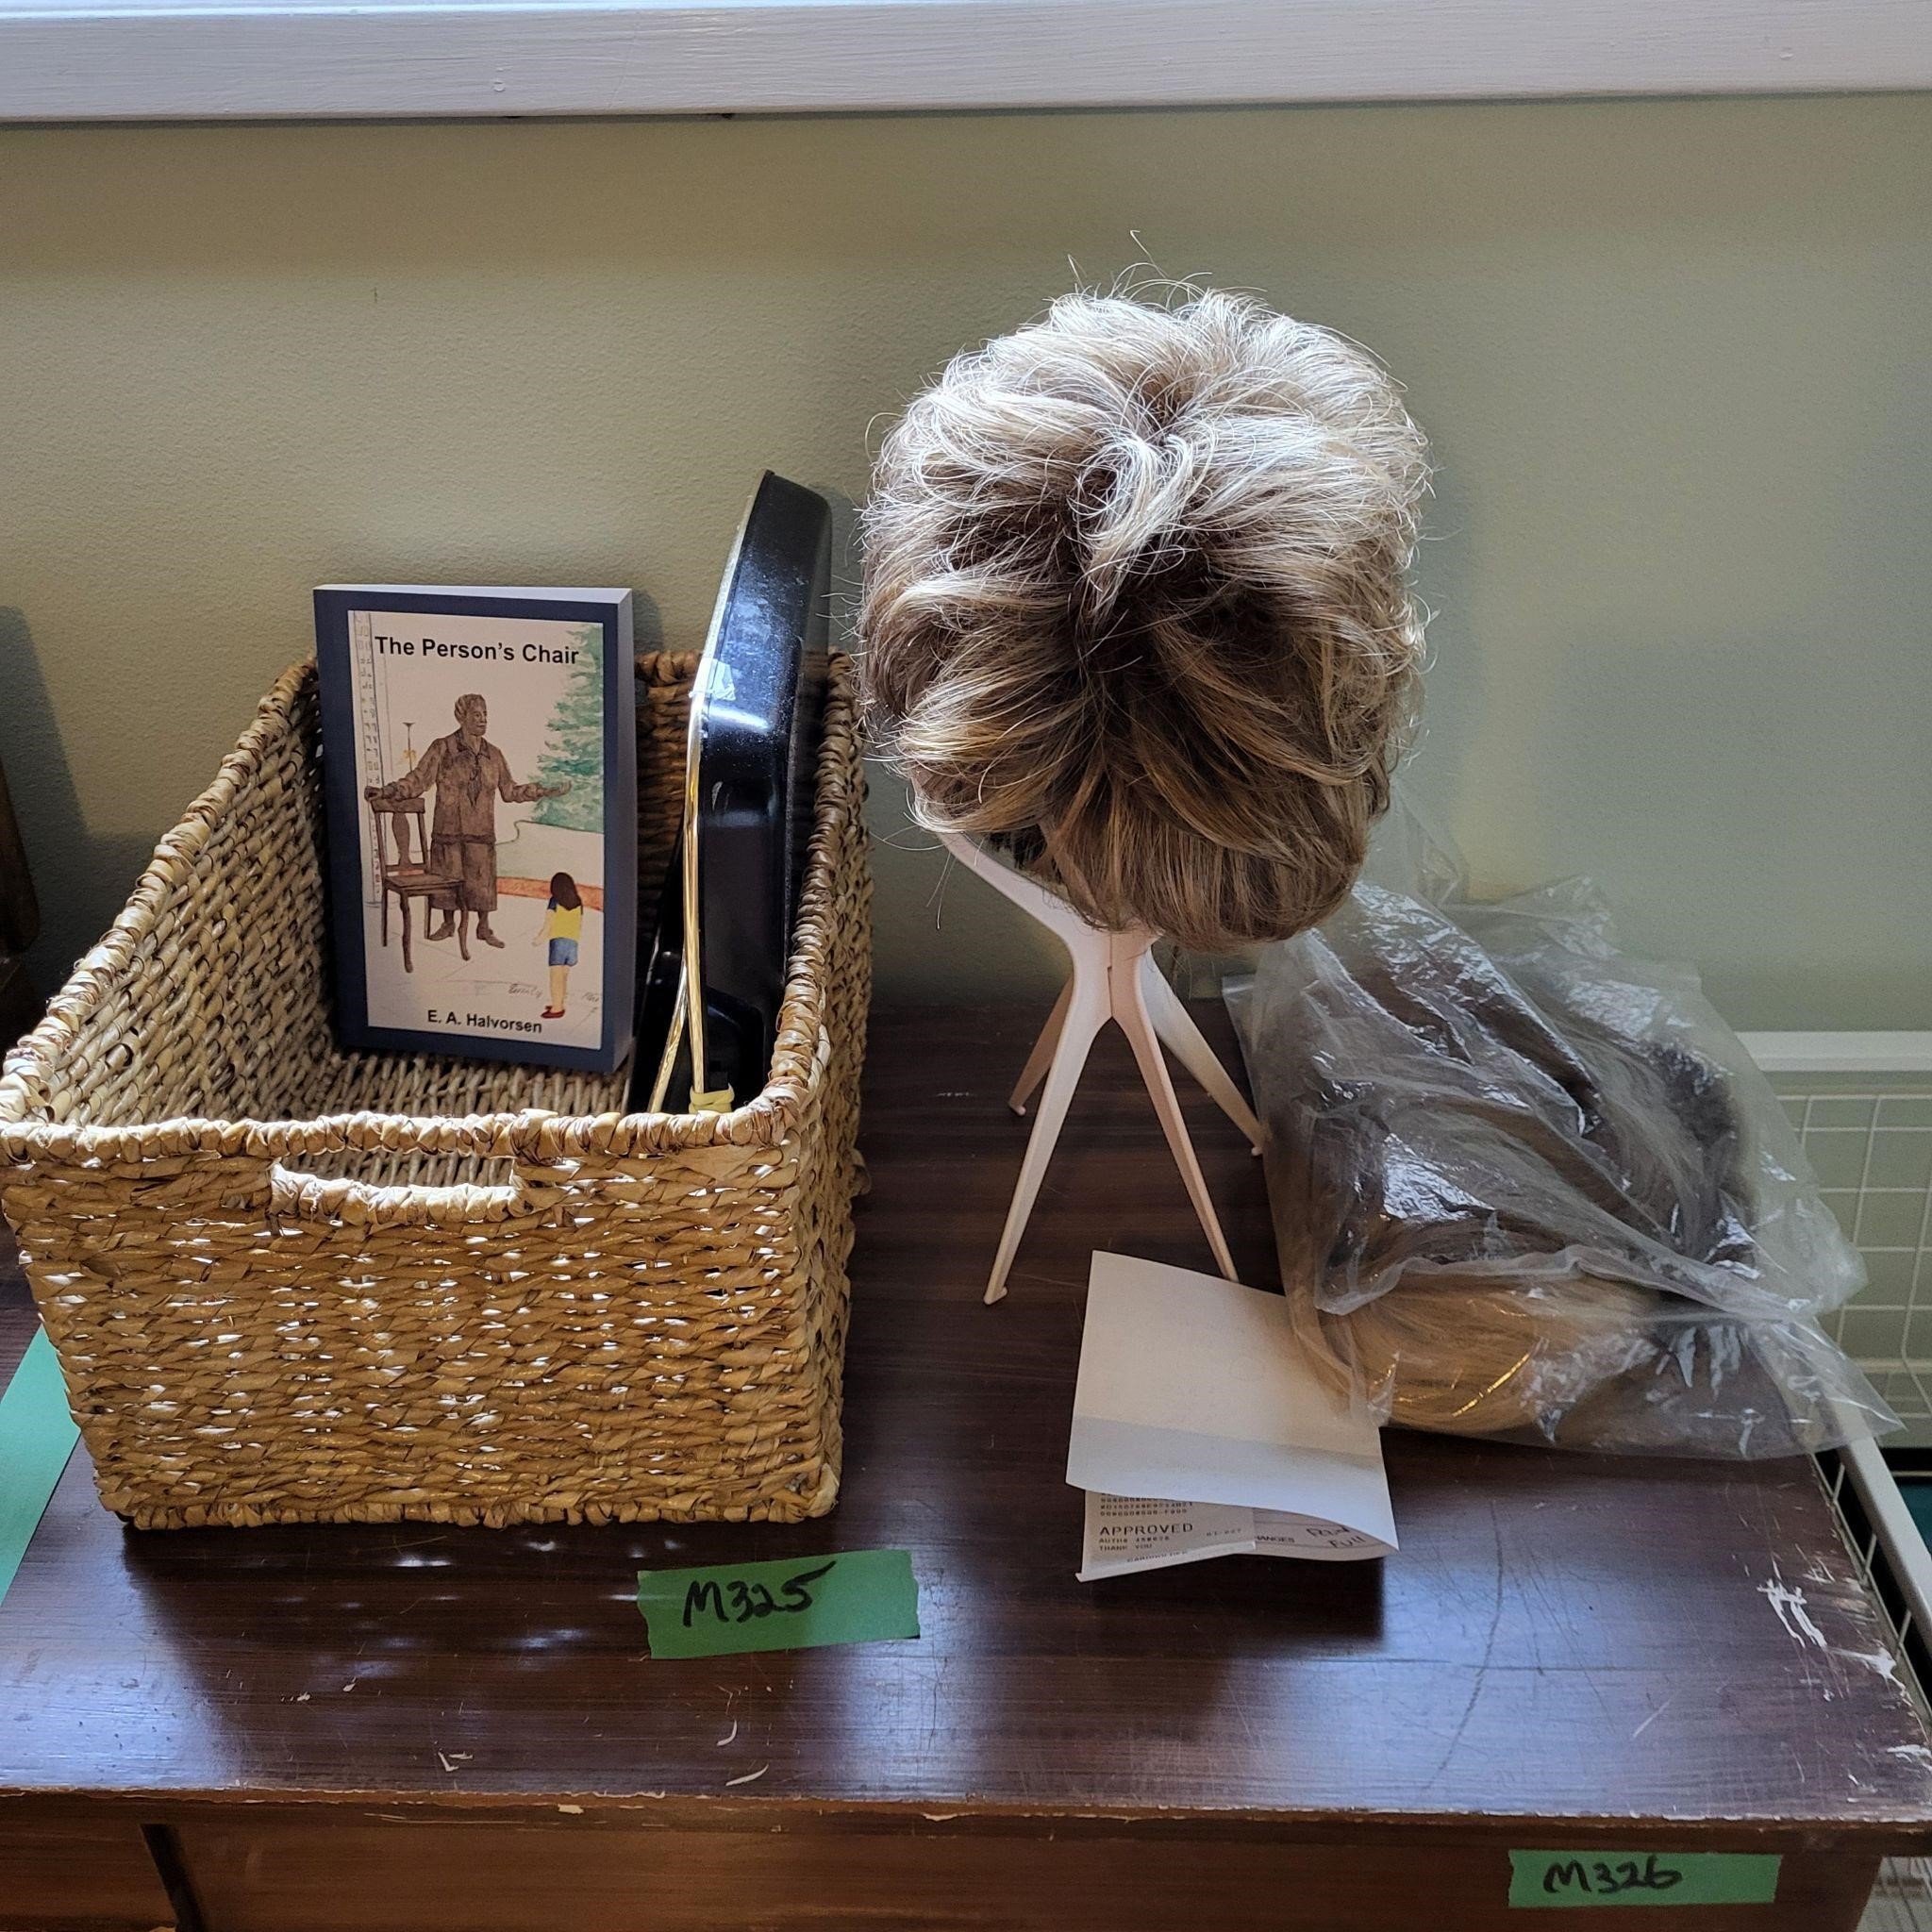 M325 Wig, hair pieces and basket